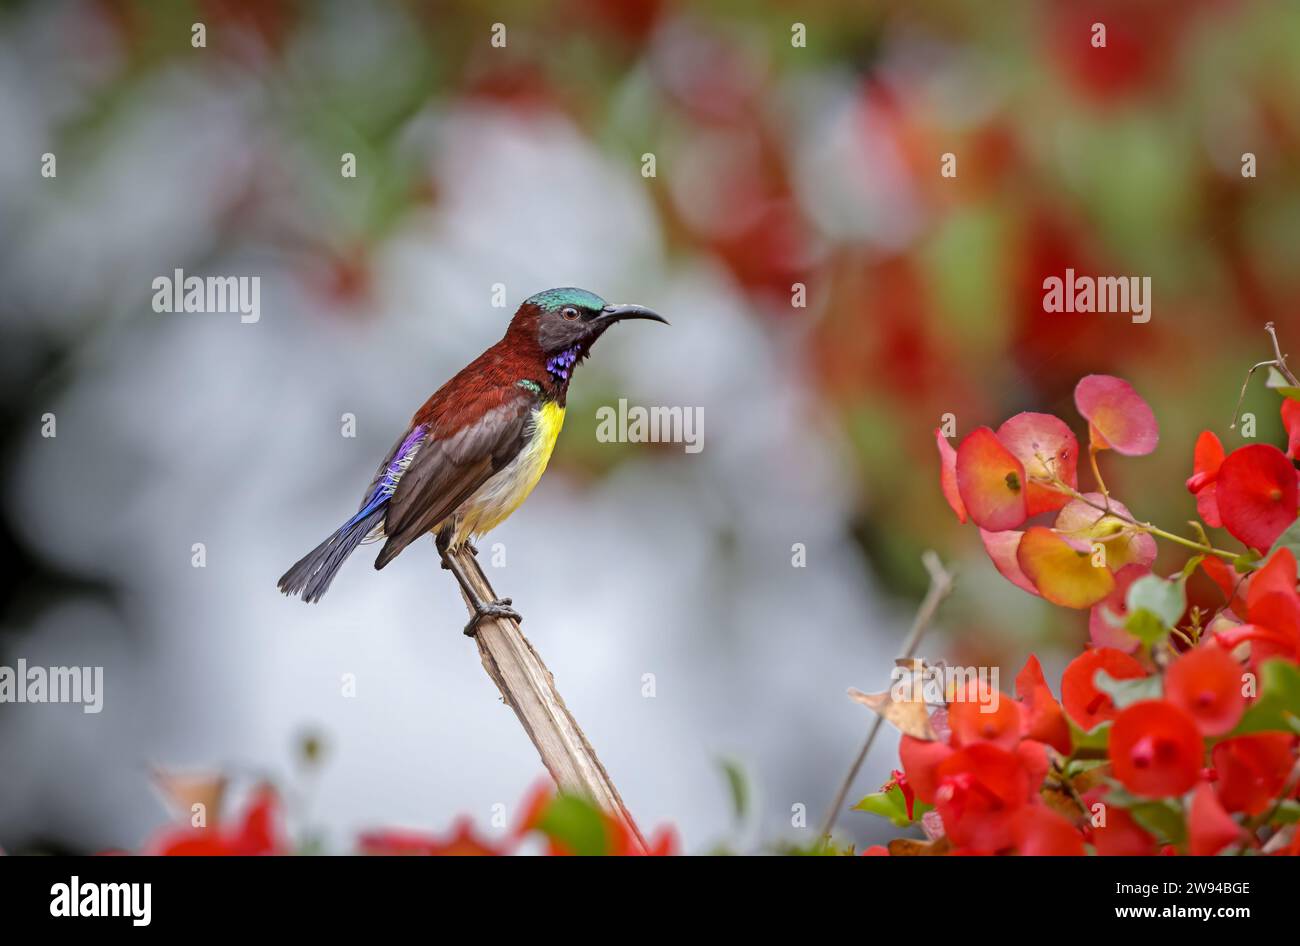 purple-rumped sunbird is a sunbird endemic to the Indian Subcontinent.this photo was taken from Bangladesh. Stock Photo